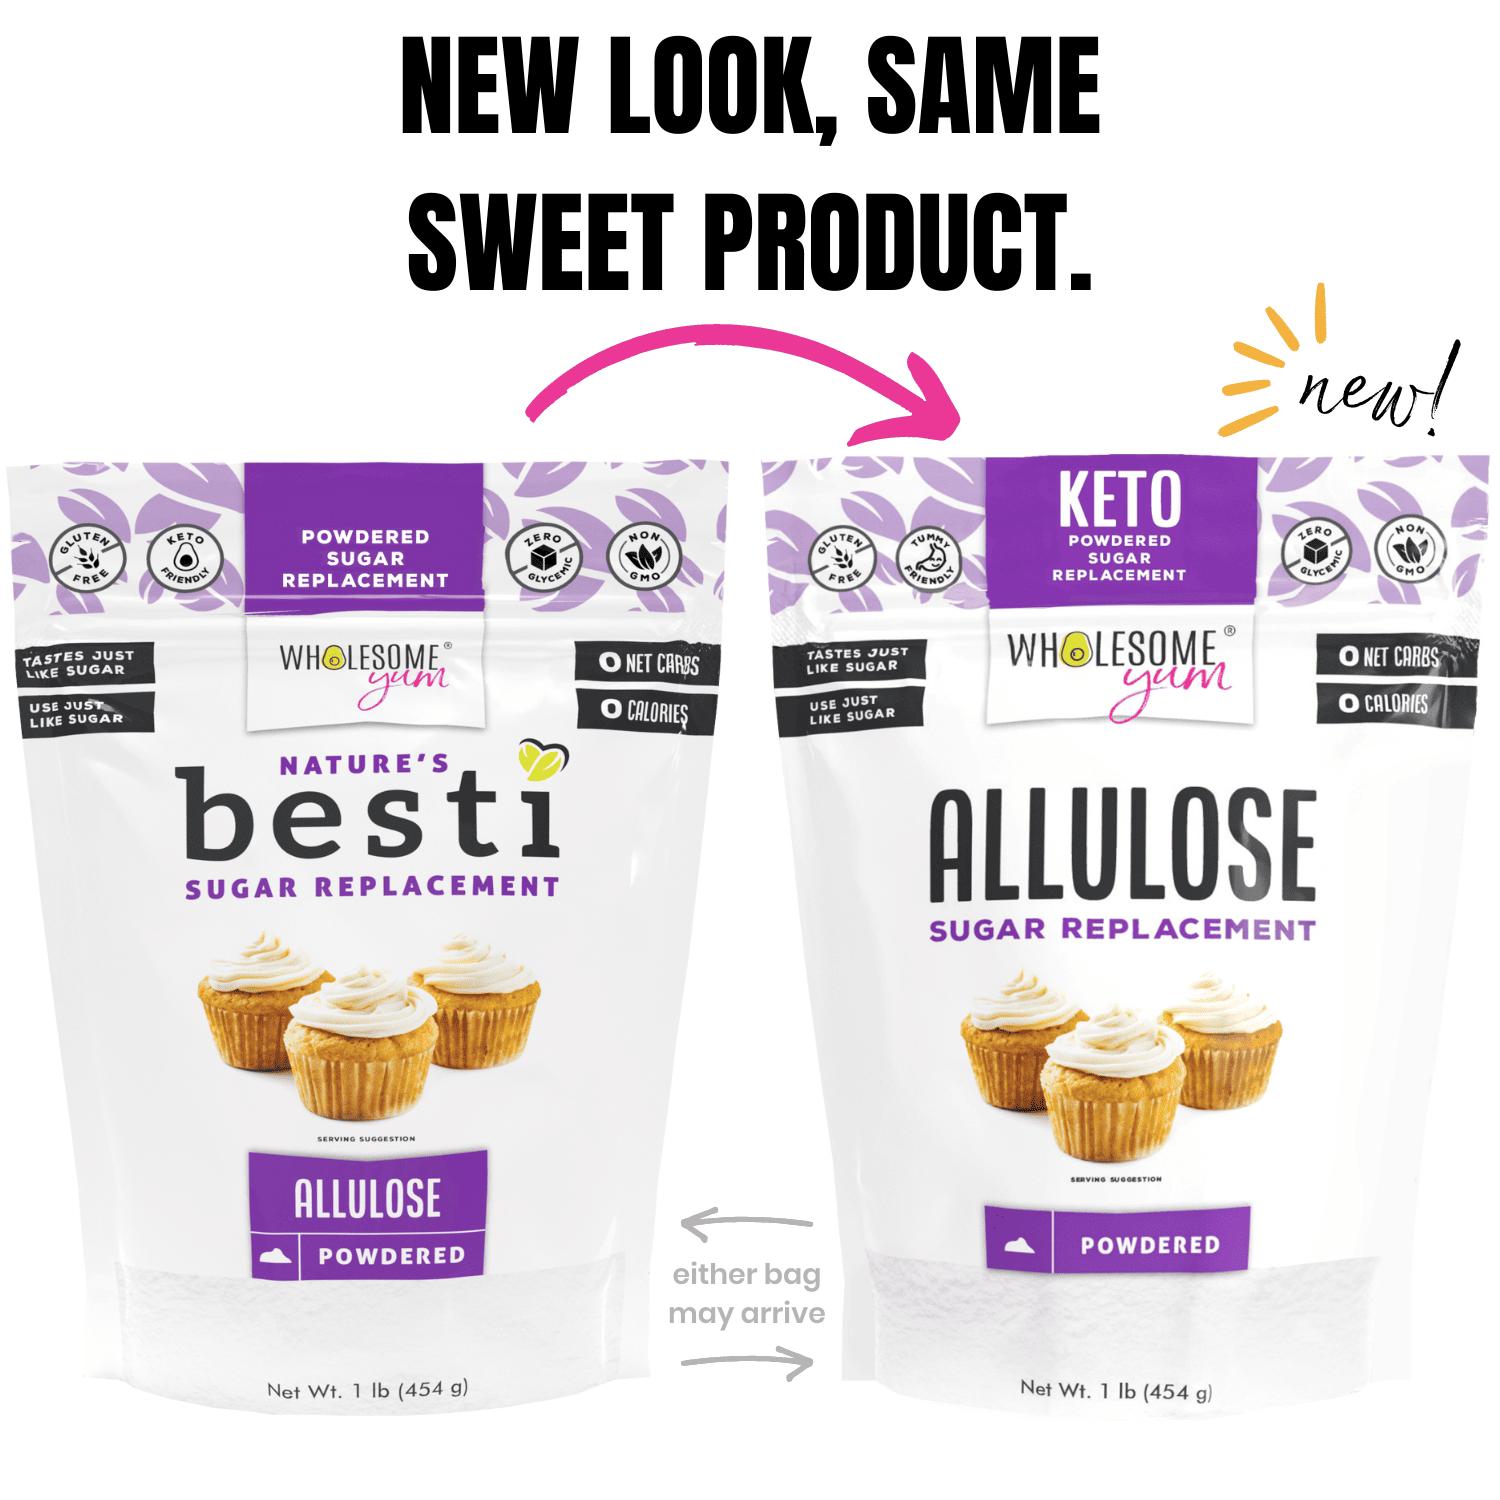 Allulose Sweetener, Keto Sweetener, 0g Net Carb, 1:1 to Sugar - 1 lb. –  Wholesome Provisions